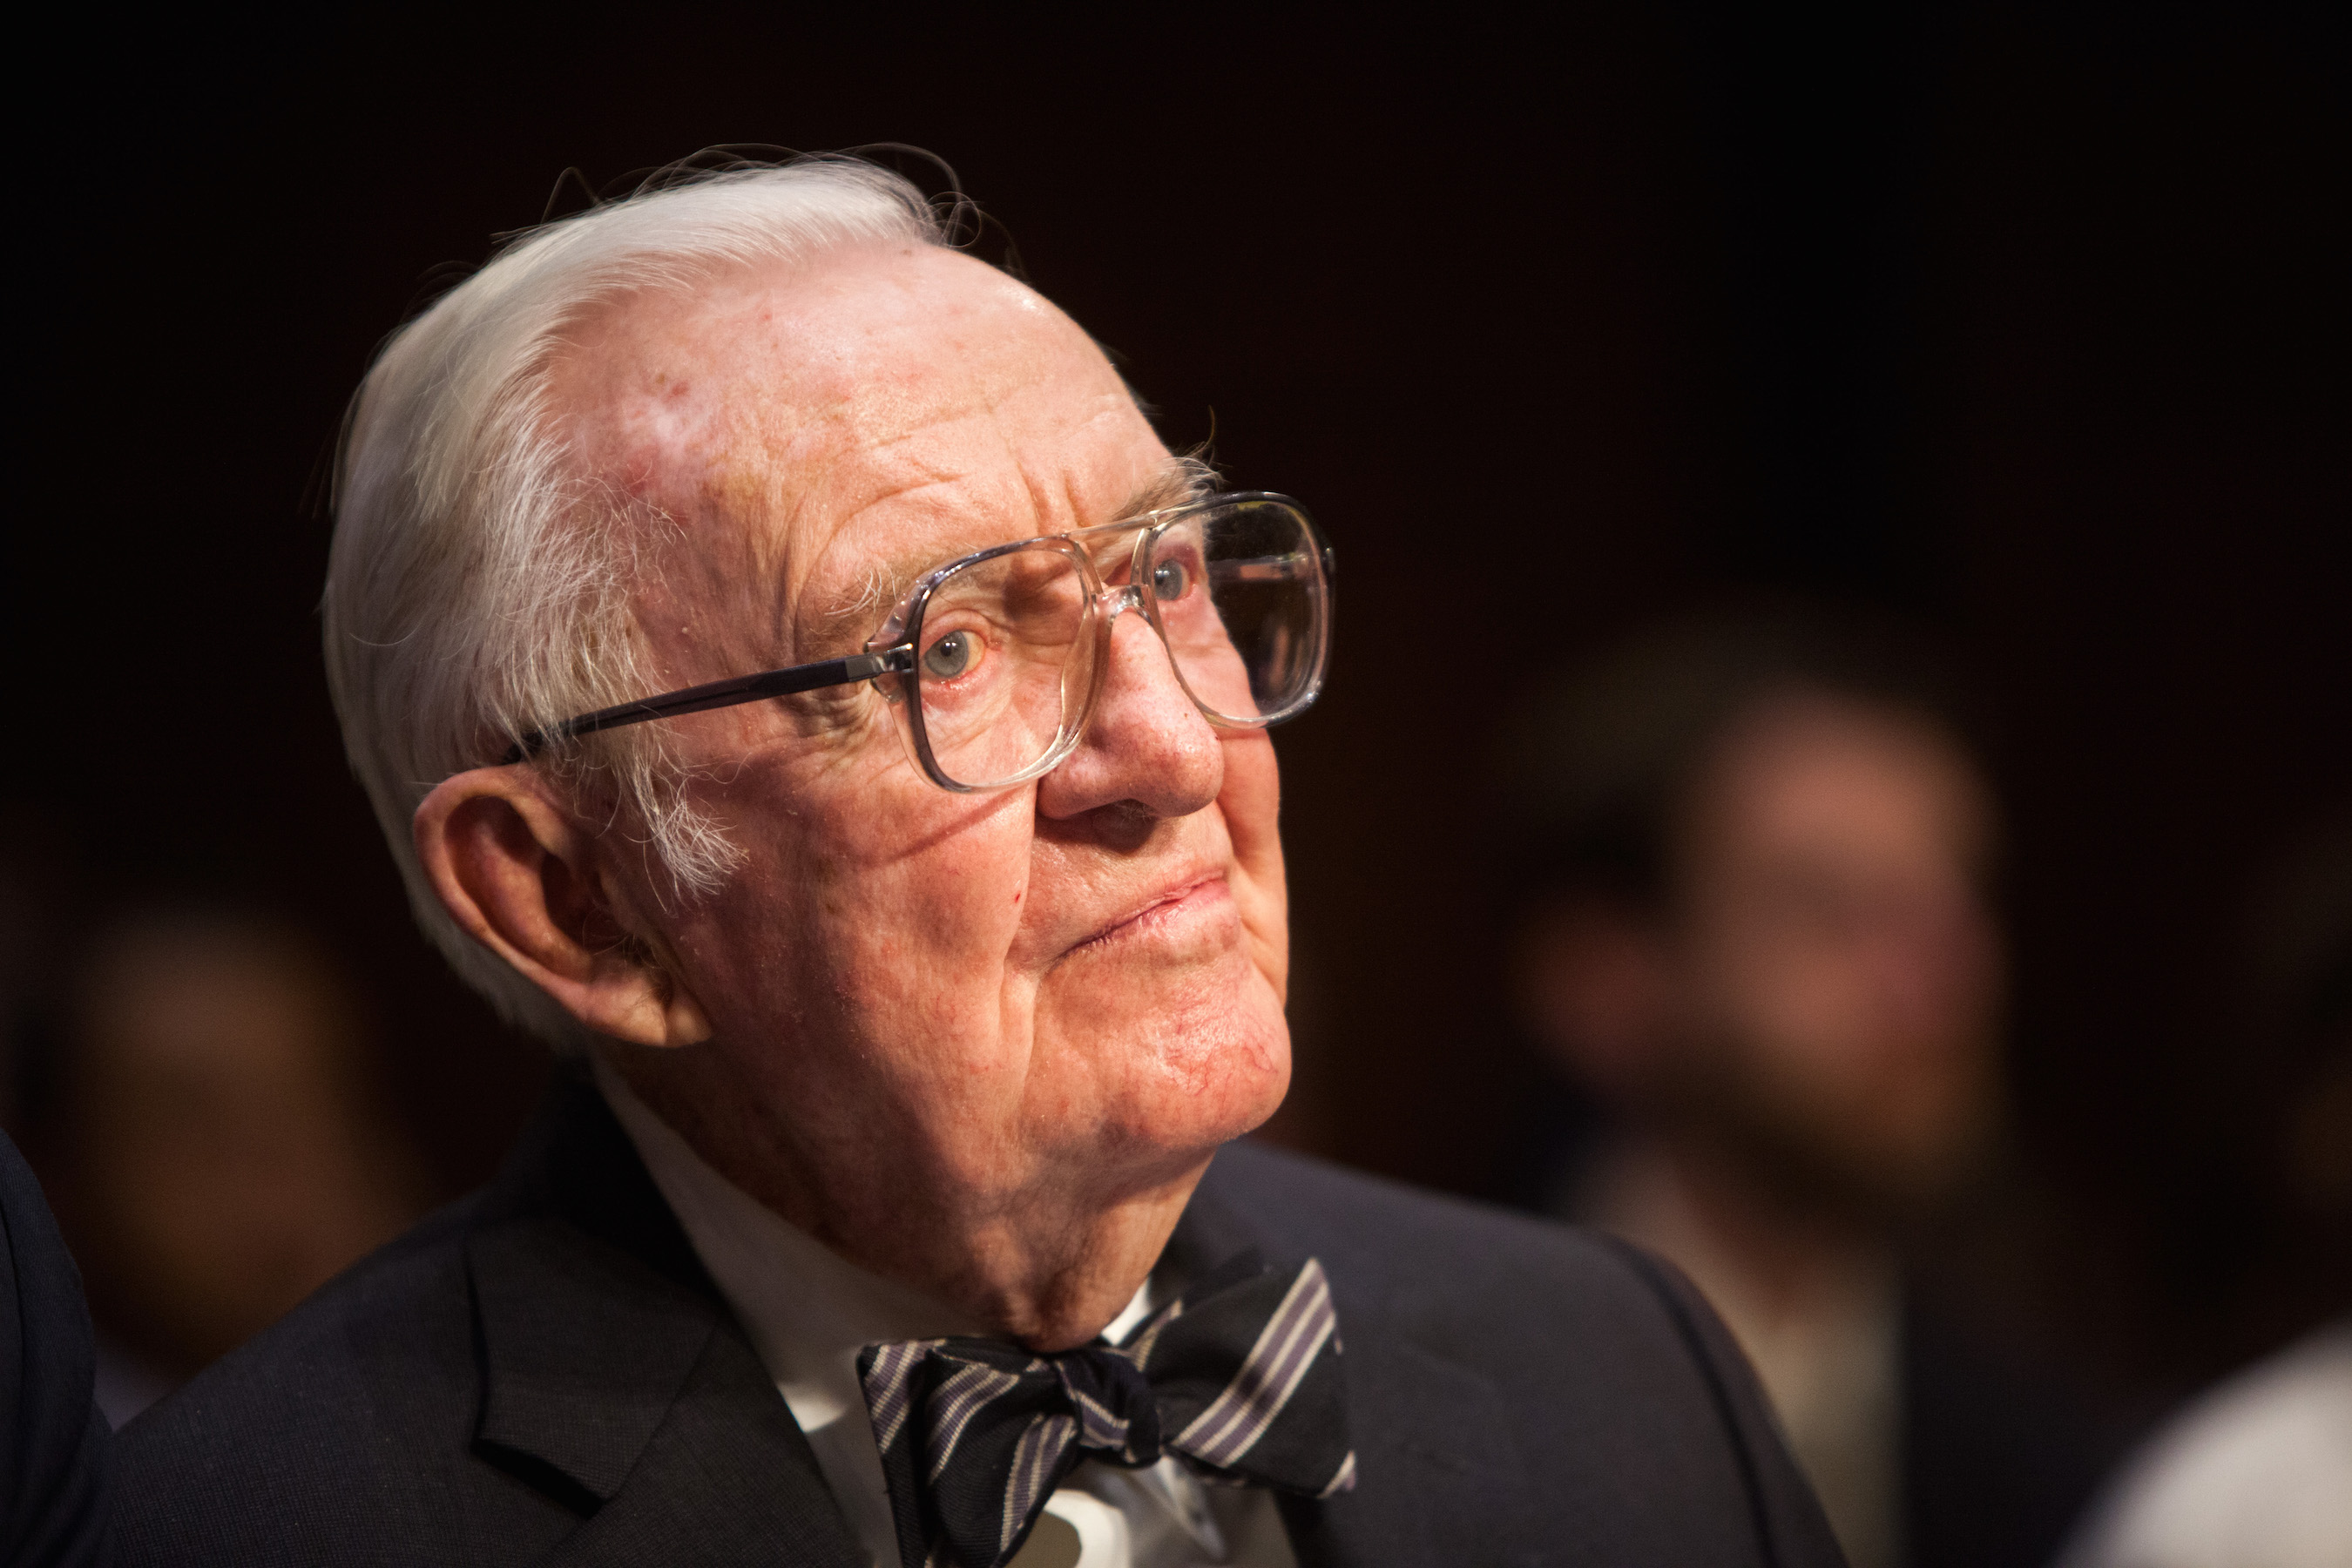 Former Supreme Court Justice John Paul Stevens testifies before the Senate Committee on Campaign Finance on Capitol Hill April 30, 2014 in Washington, DC. Stevens is testifying on a hearing entitled "Dollars and Sense: How Undisclosed Money and Post-McCutcheon Campaign Finance Will Affect 2014 and Beyond". (Photo by Allison Shelley/Getty Images)